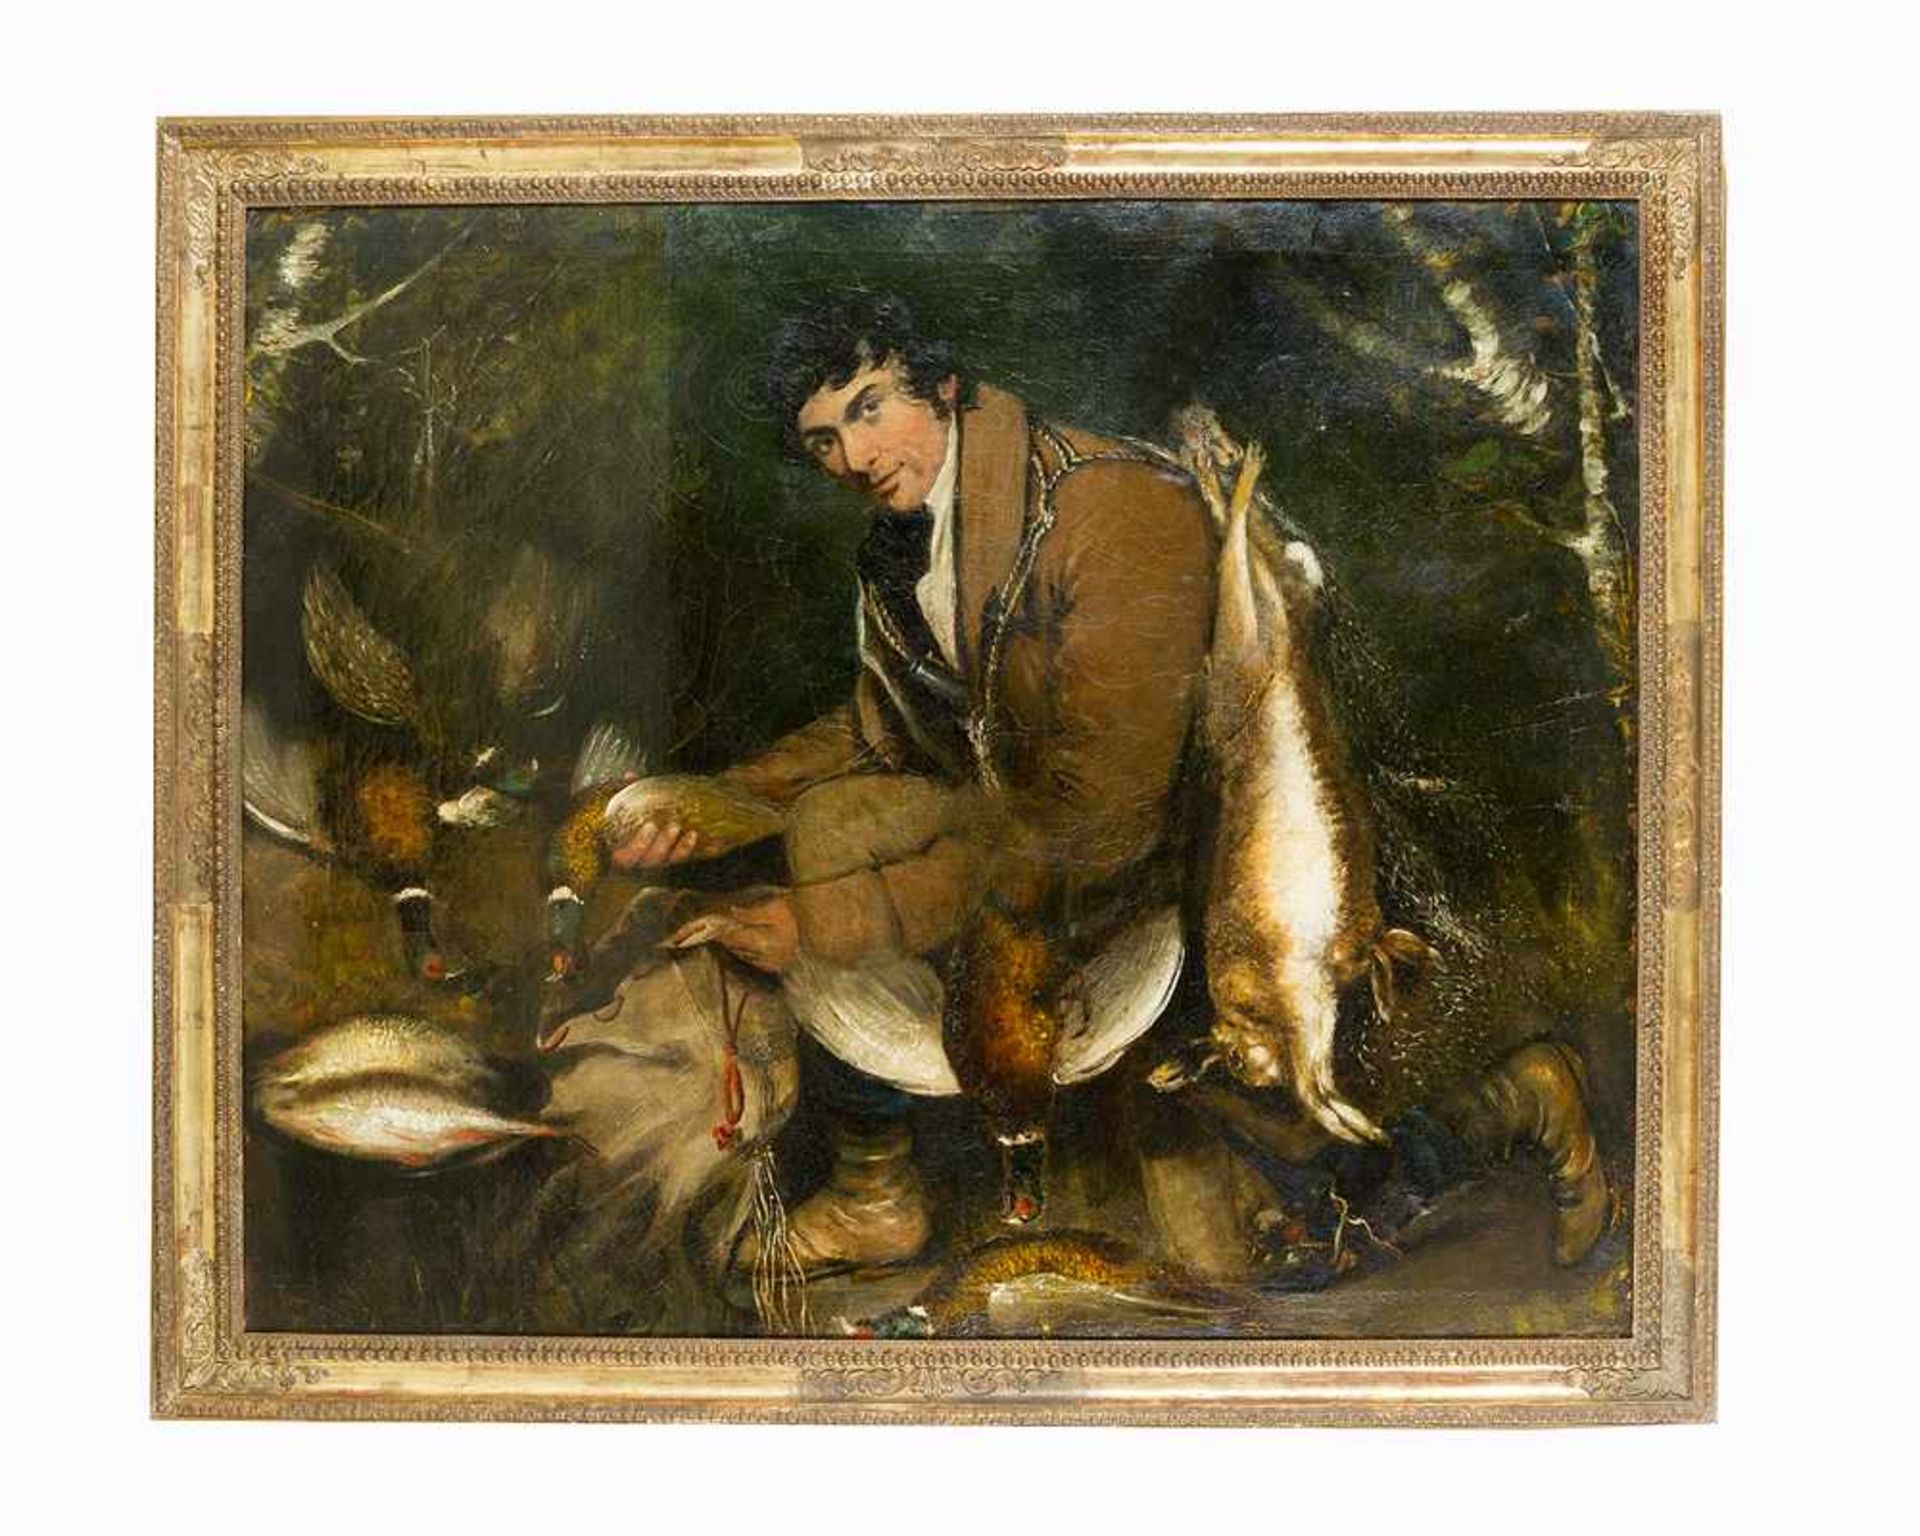 English School around 1800, hunter with his prey; oil on canvas, framed.